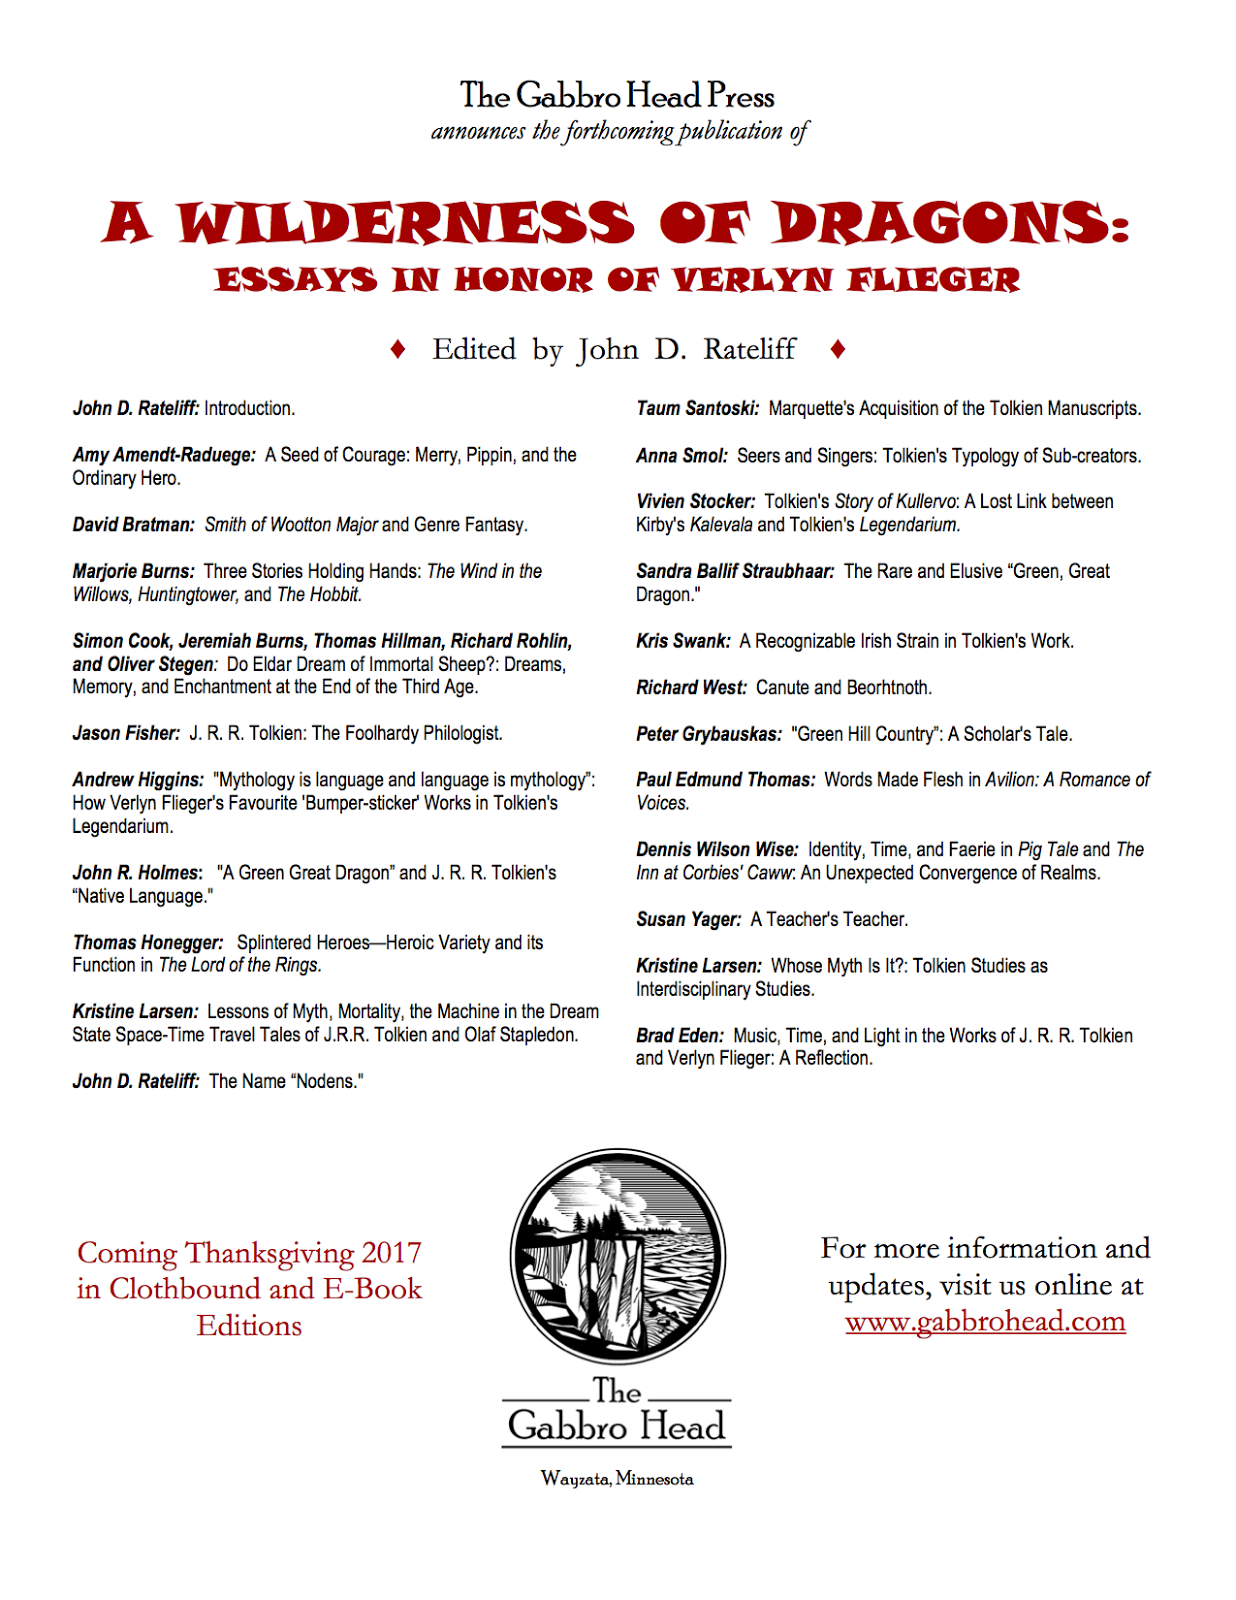 A Wilderness of Dragons: Essays in Honor of Verlyn Flieger